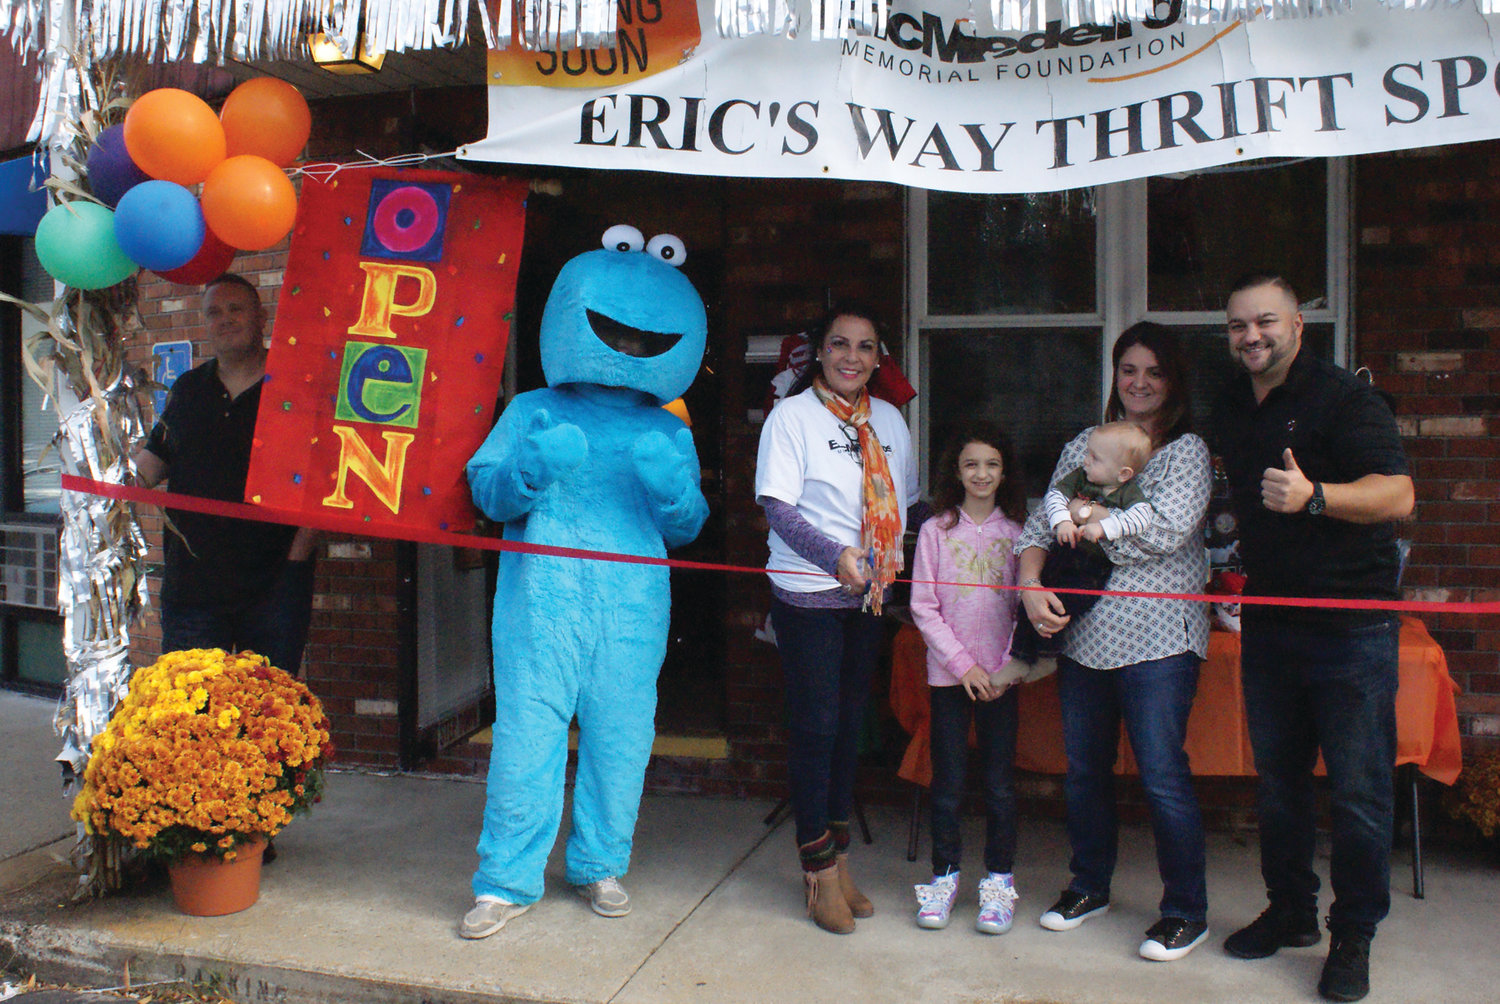 NEW BUSINESS: Eric’s Way Thrift Spot has opened at 471 Atwood Ave. and celebrated its grand opening on Oct. 26. The store sells new and gently used items to benefit the Eric Medeiros Memorial Foundation. Pictured at the ribbon-cutting ceremony are, from left, Matt Adams, Cookie Monster (Philip Page), owner Anna Casador-Saccoccio, Abby Bober, Benjamin Adams, Jeannette Saccoccio and Ward 4 City Councilman Ed Brady.